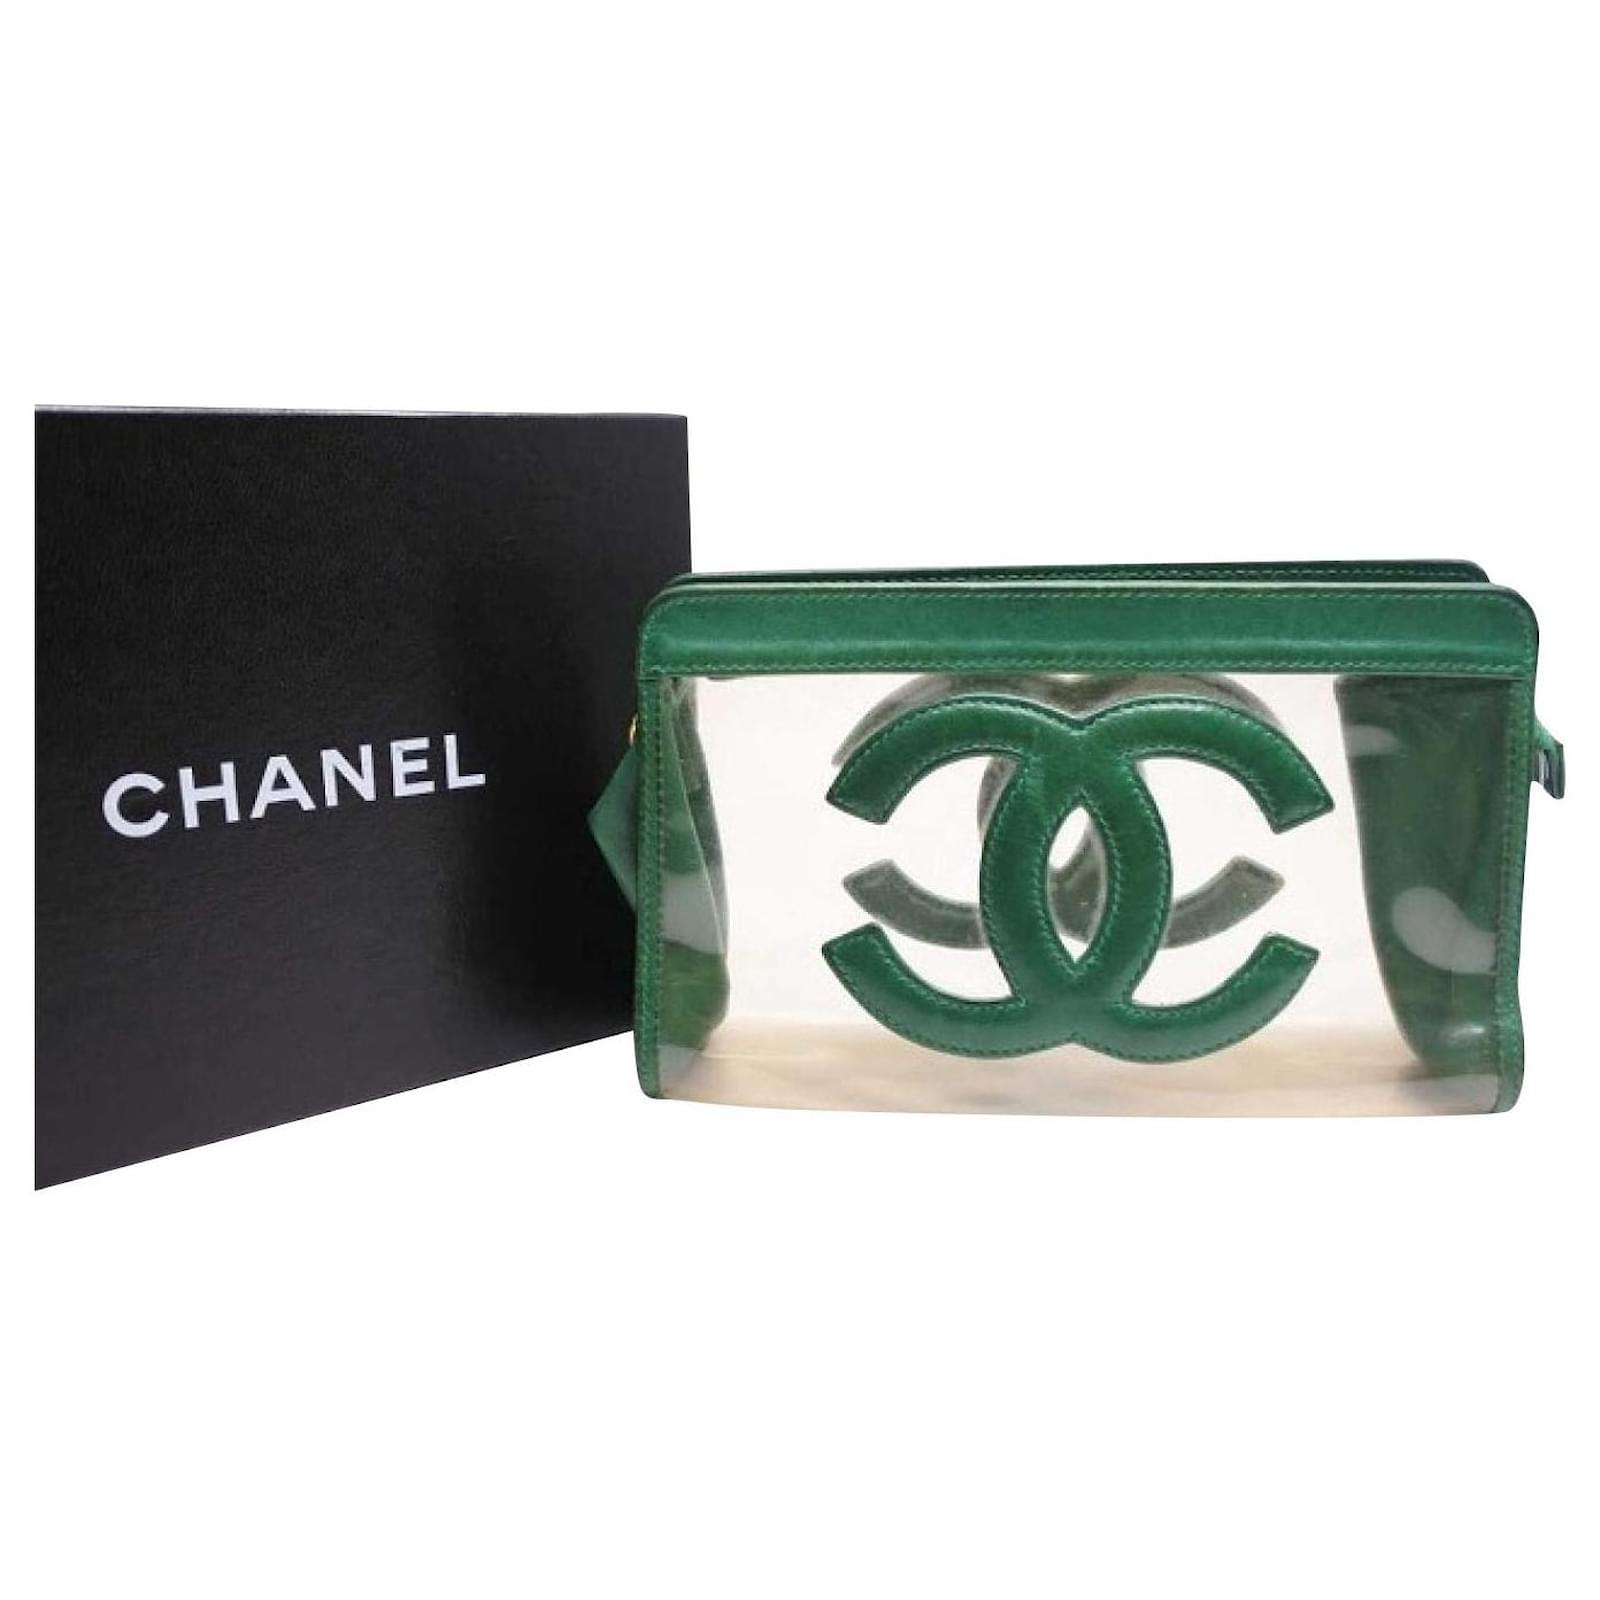 Used] CHANEL CHANEL Clear Clutch Bag Second Bag Green Vinyl